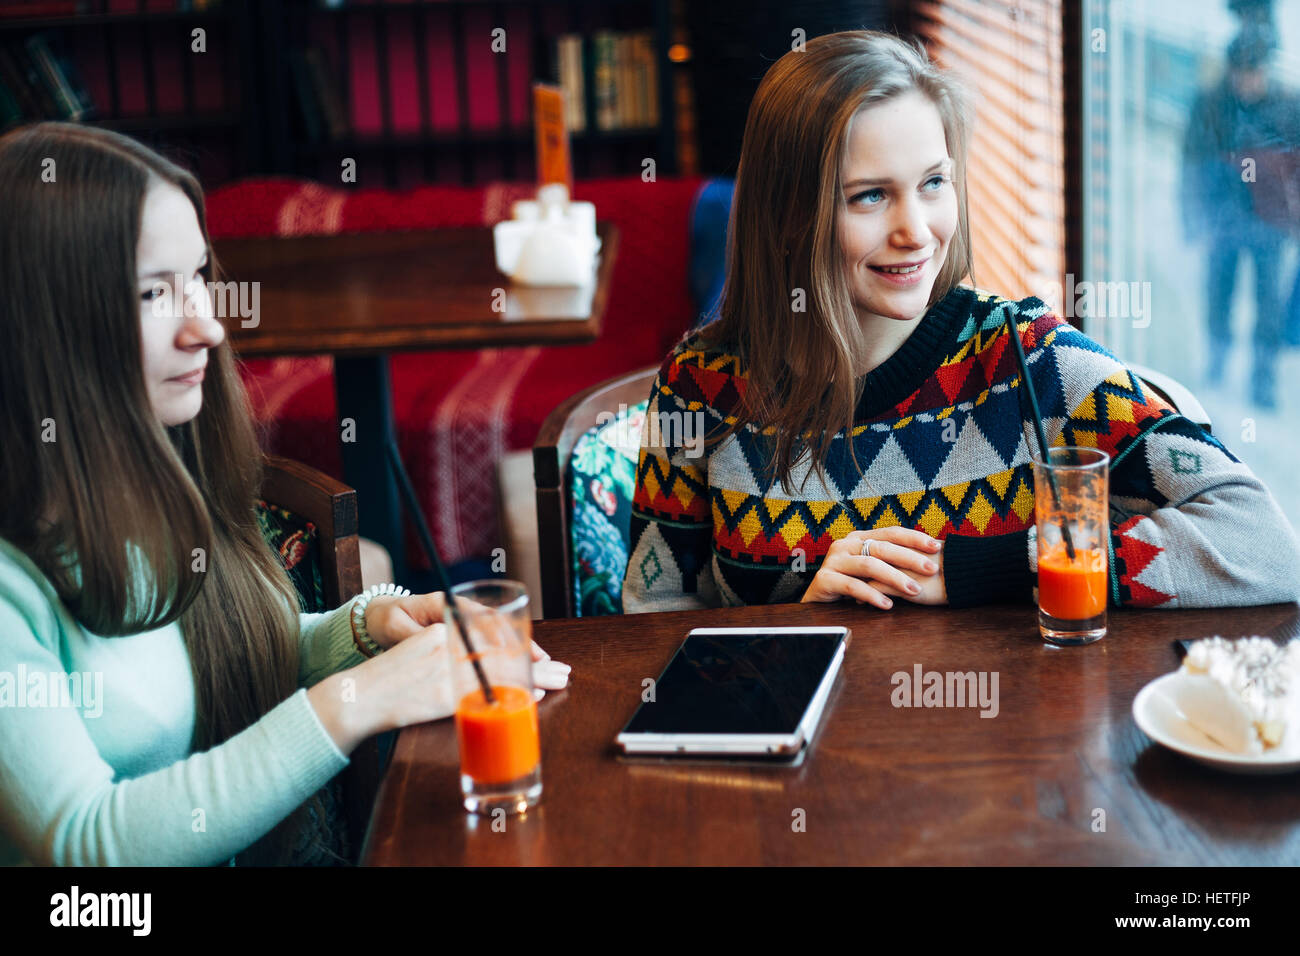 Girl friends communicate in a cafe Stock Photo